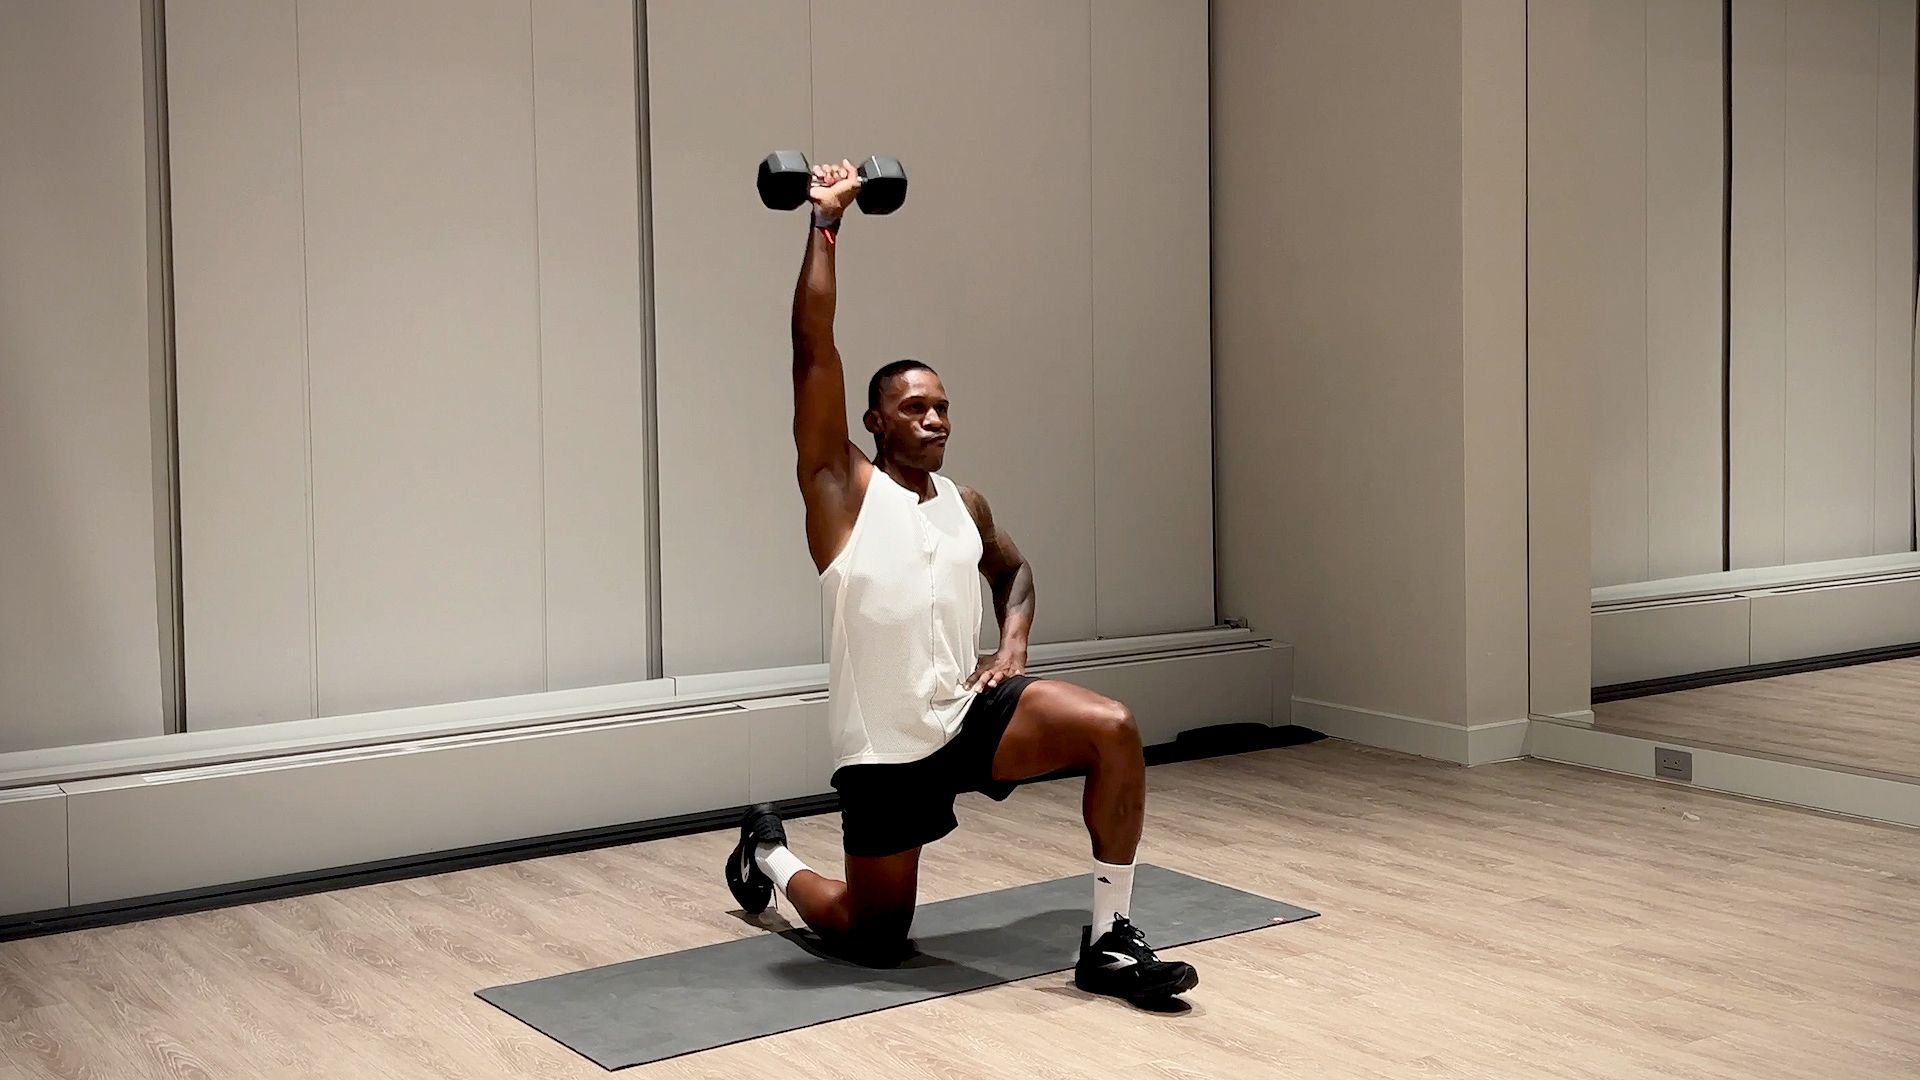 Dumbbell Exercises – Shoulders and Arms | Productive Fitness